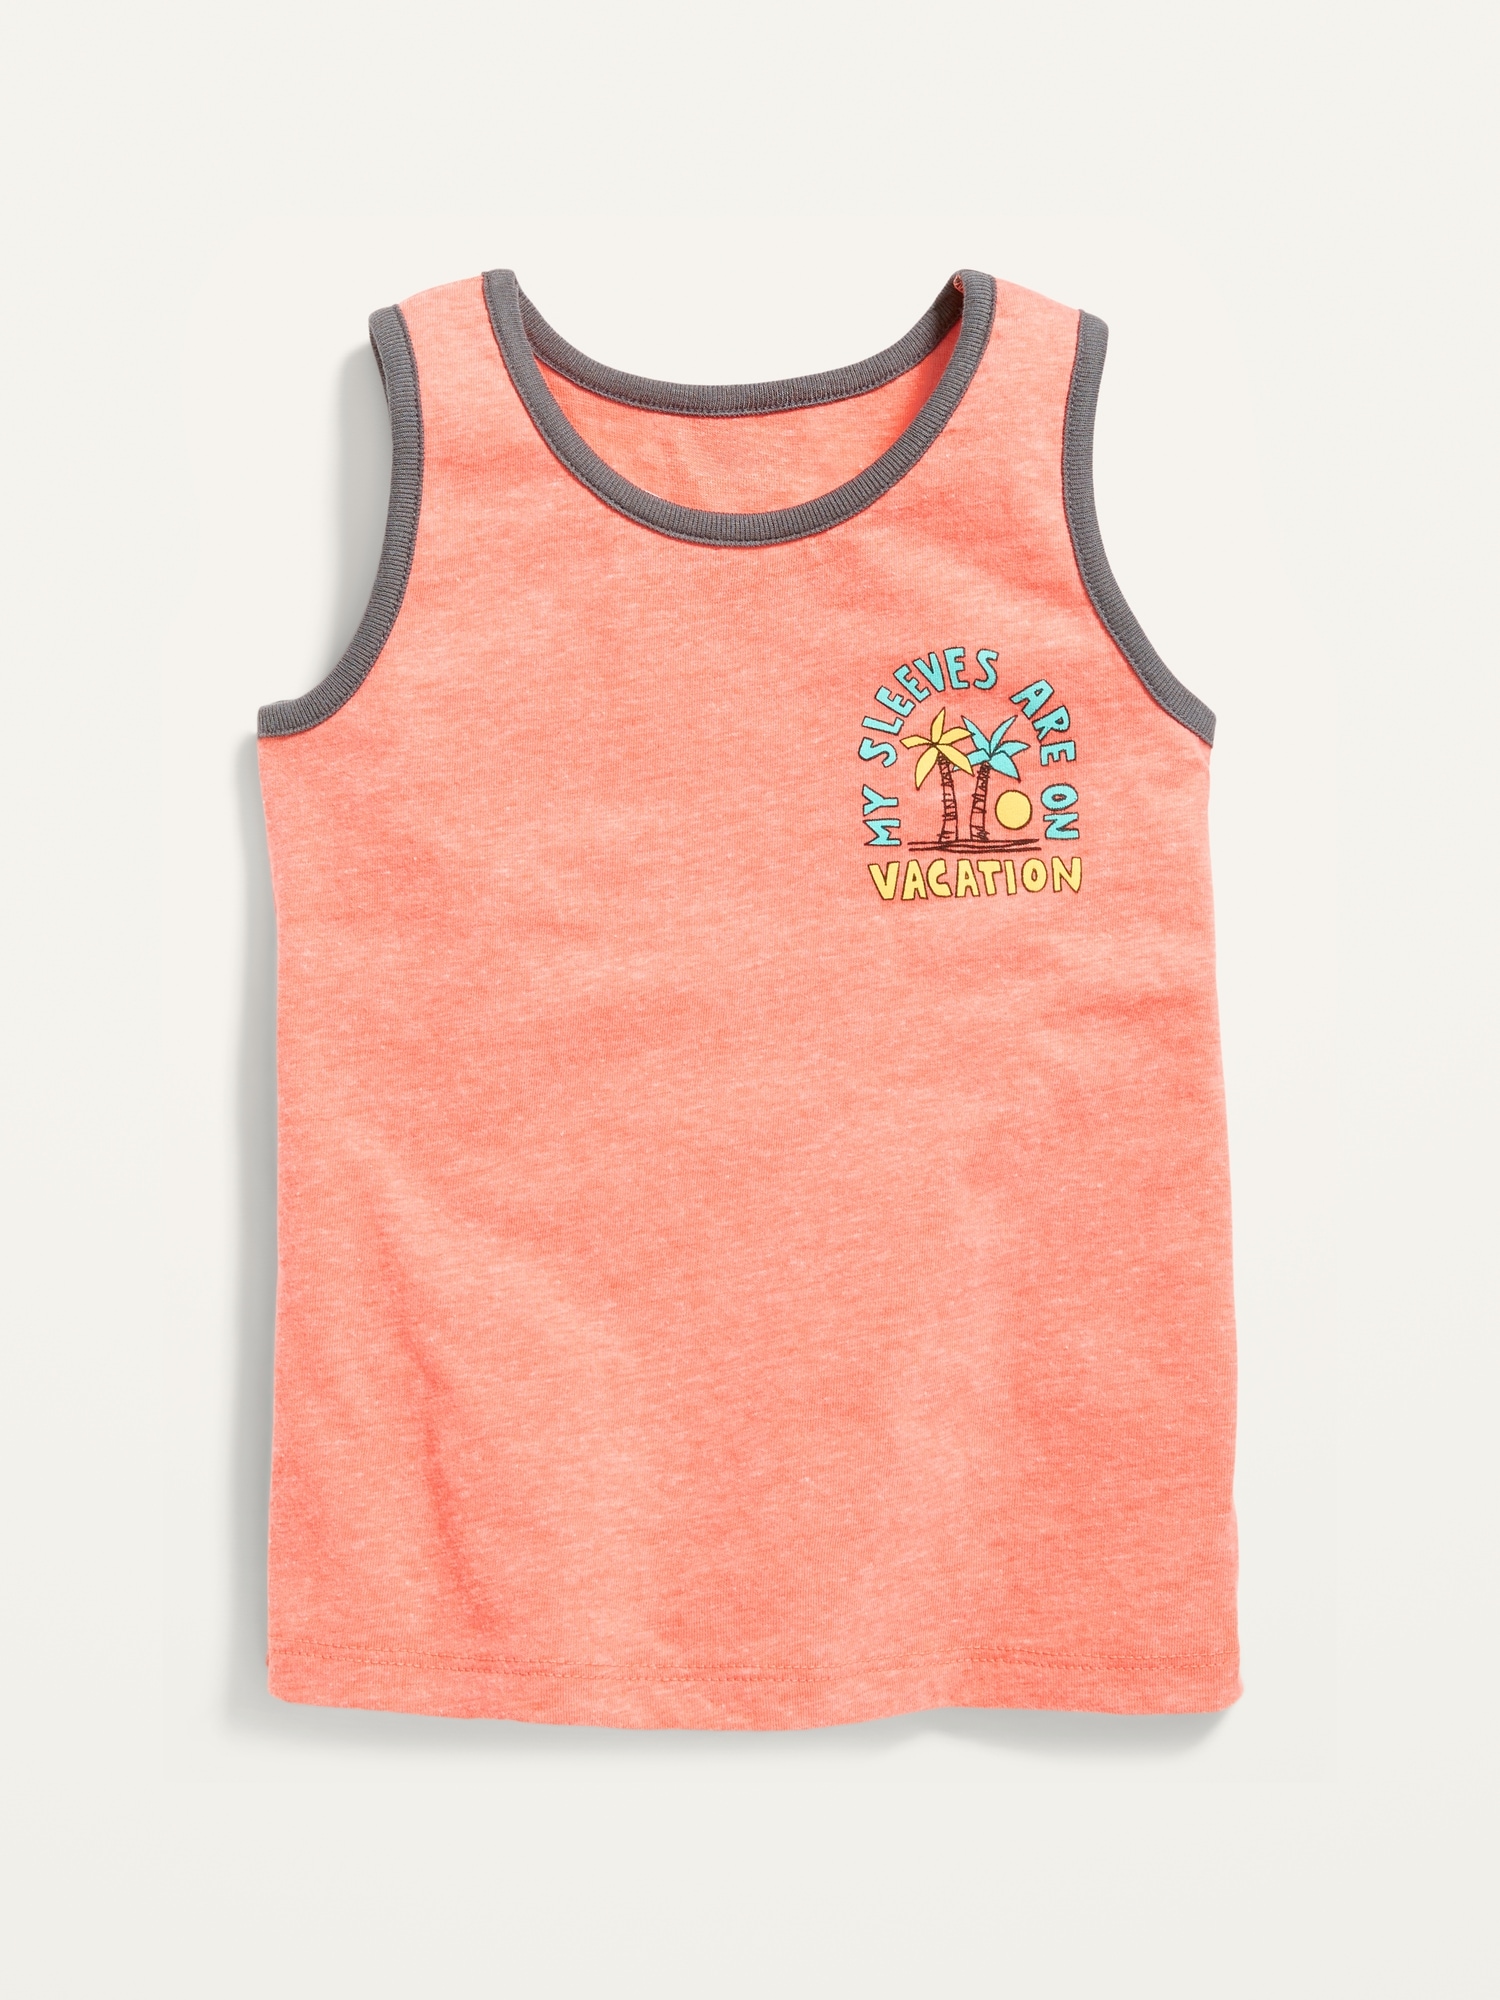 Vintage Graphic Tank Top for Toddler Boys 